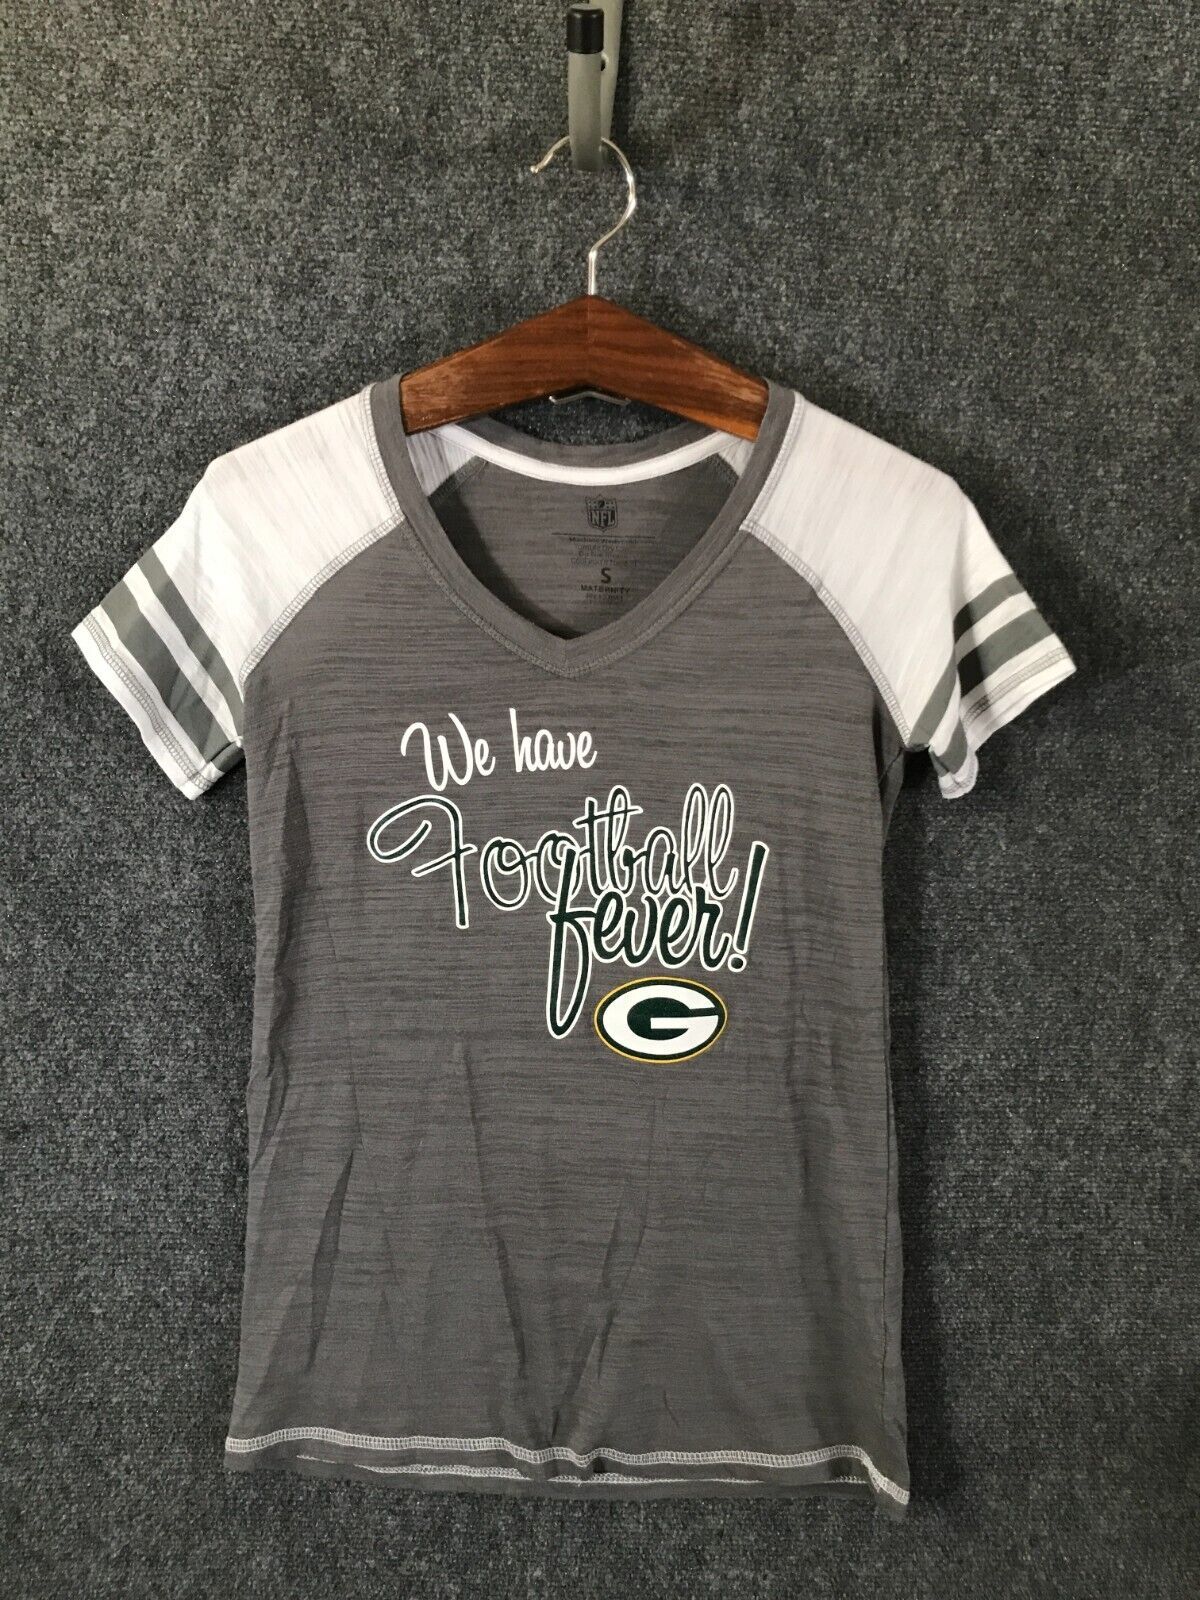 Primary image for NFL Green Bay Packers Womens T-Shirt Size Small Gray (We Have Football Fever)